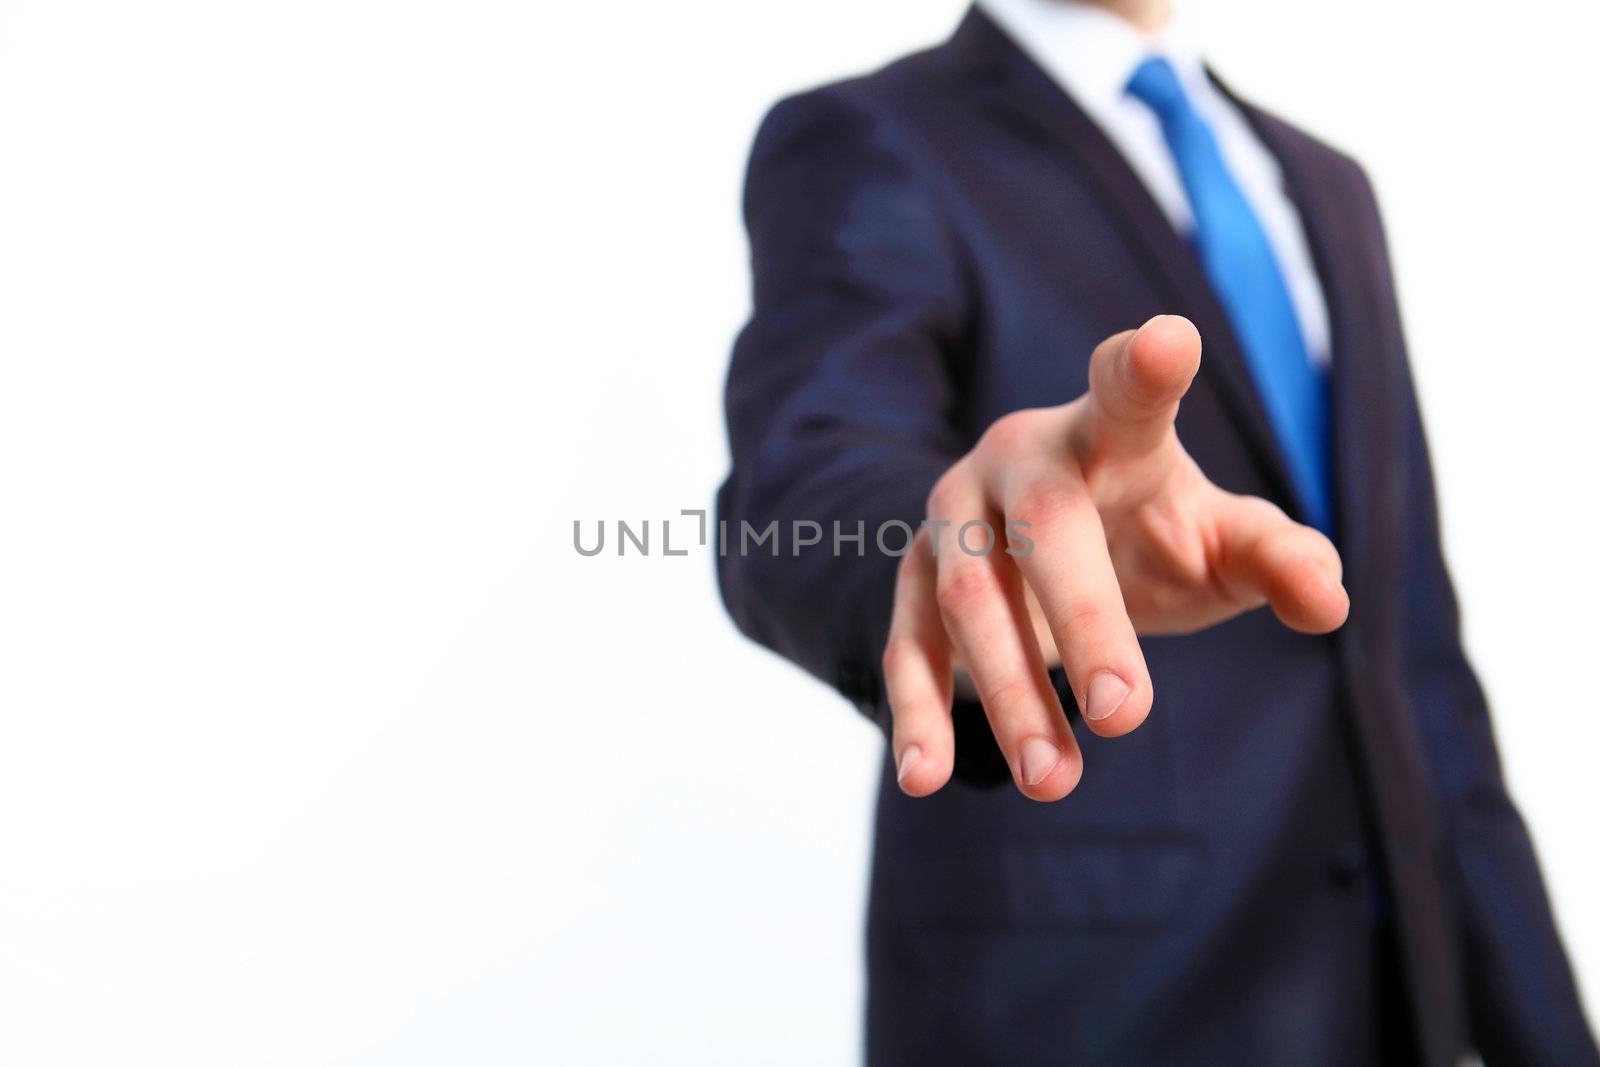 Business man in suit pushing a button with his finger